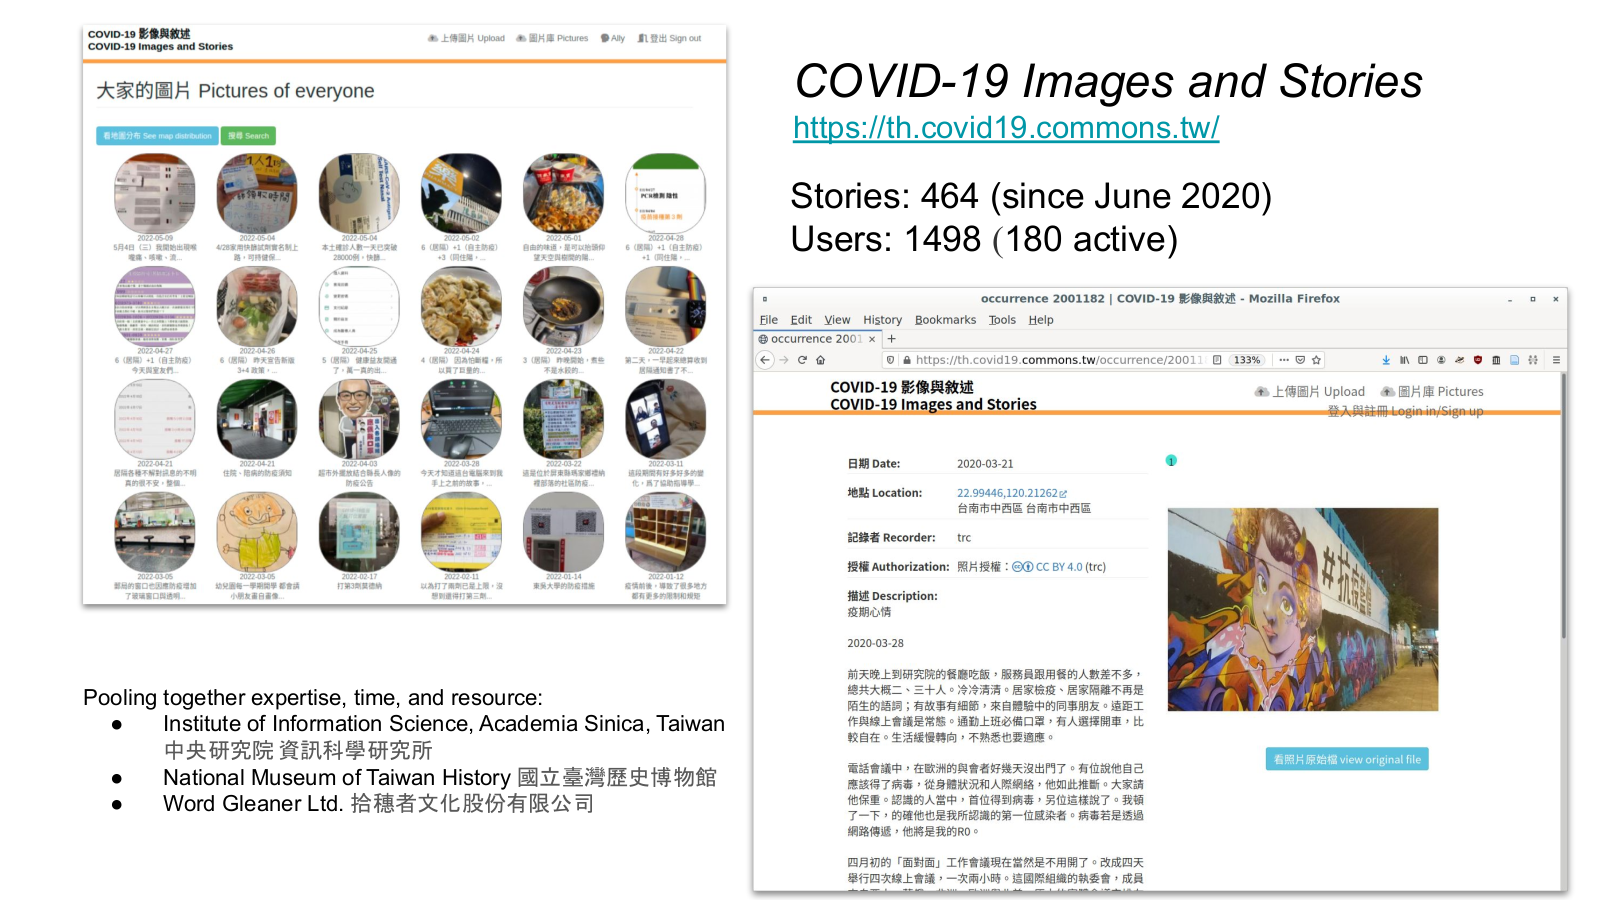 The COVID-19 Images and Stories website, as in May 2022